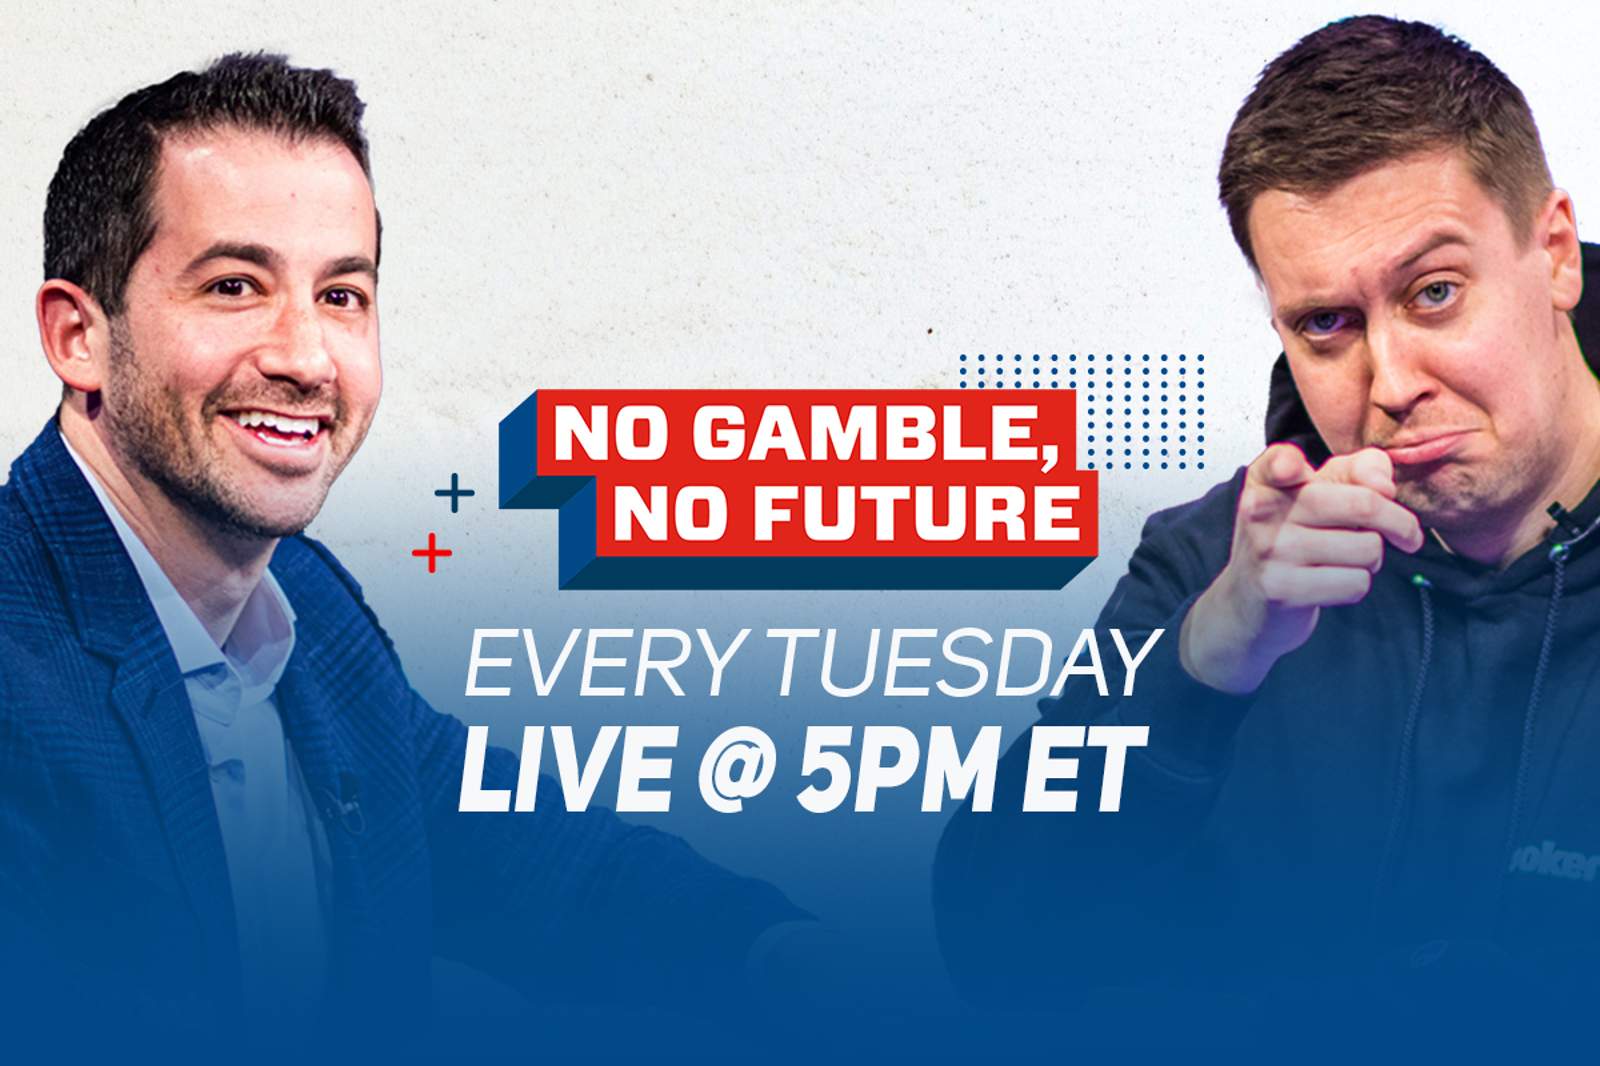 No Gamble, No Future Episode 14 on Today at 5 p.m. ET with Phil Hellmuth and Daniel Negreanu